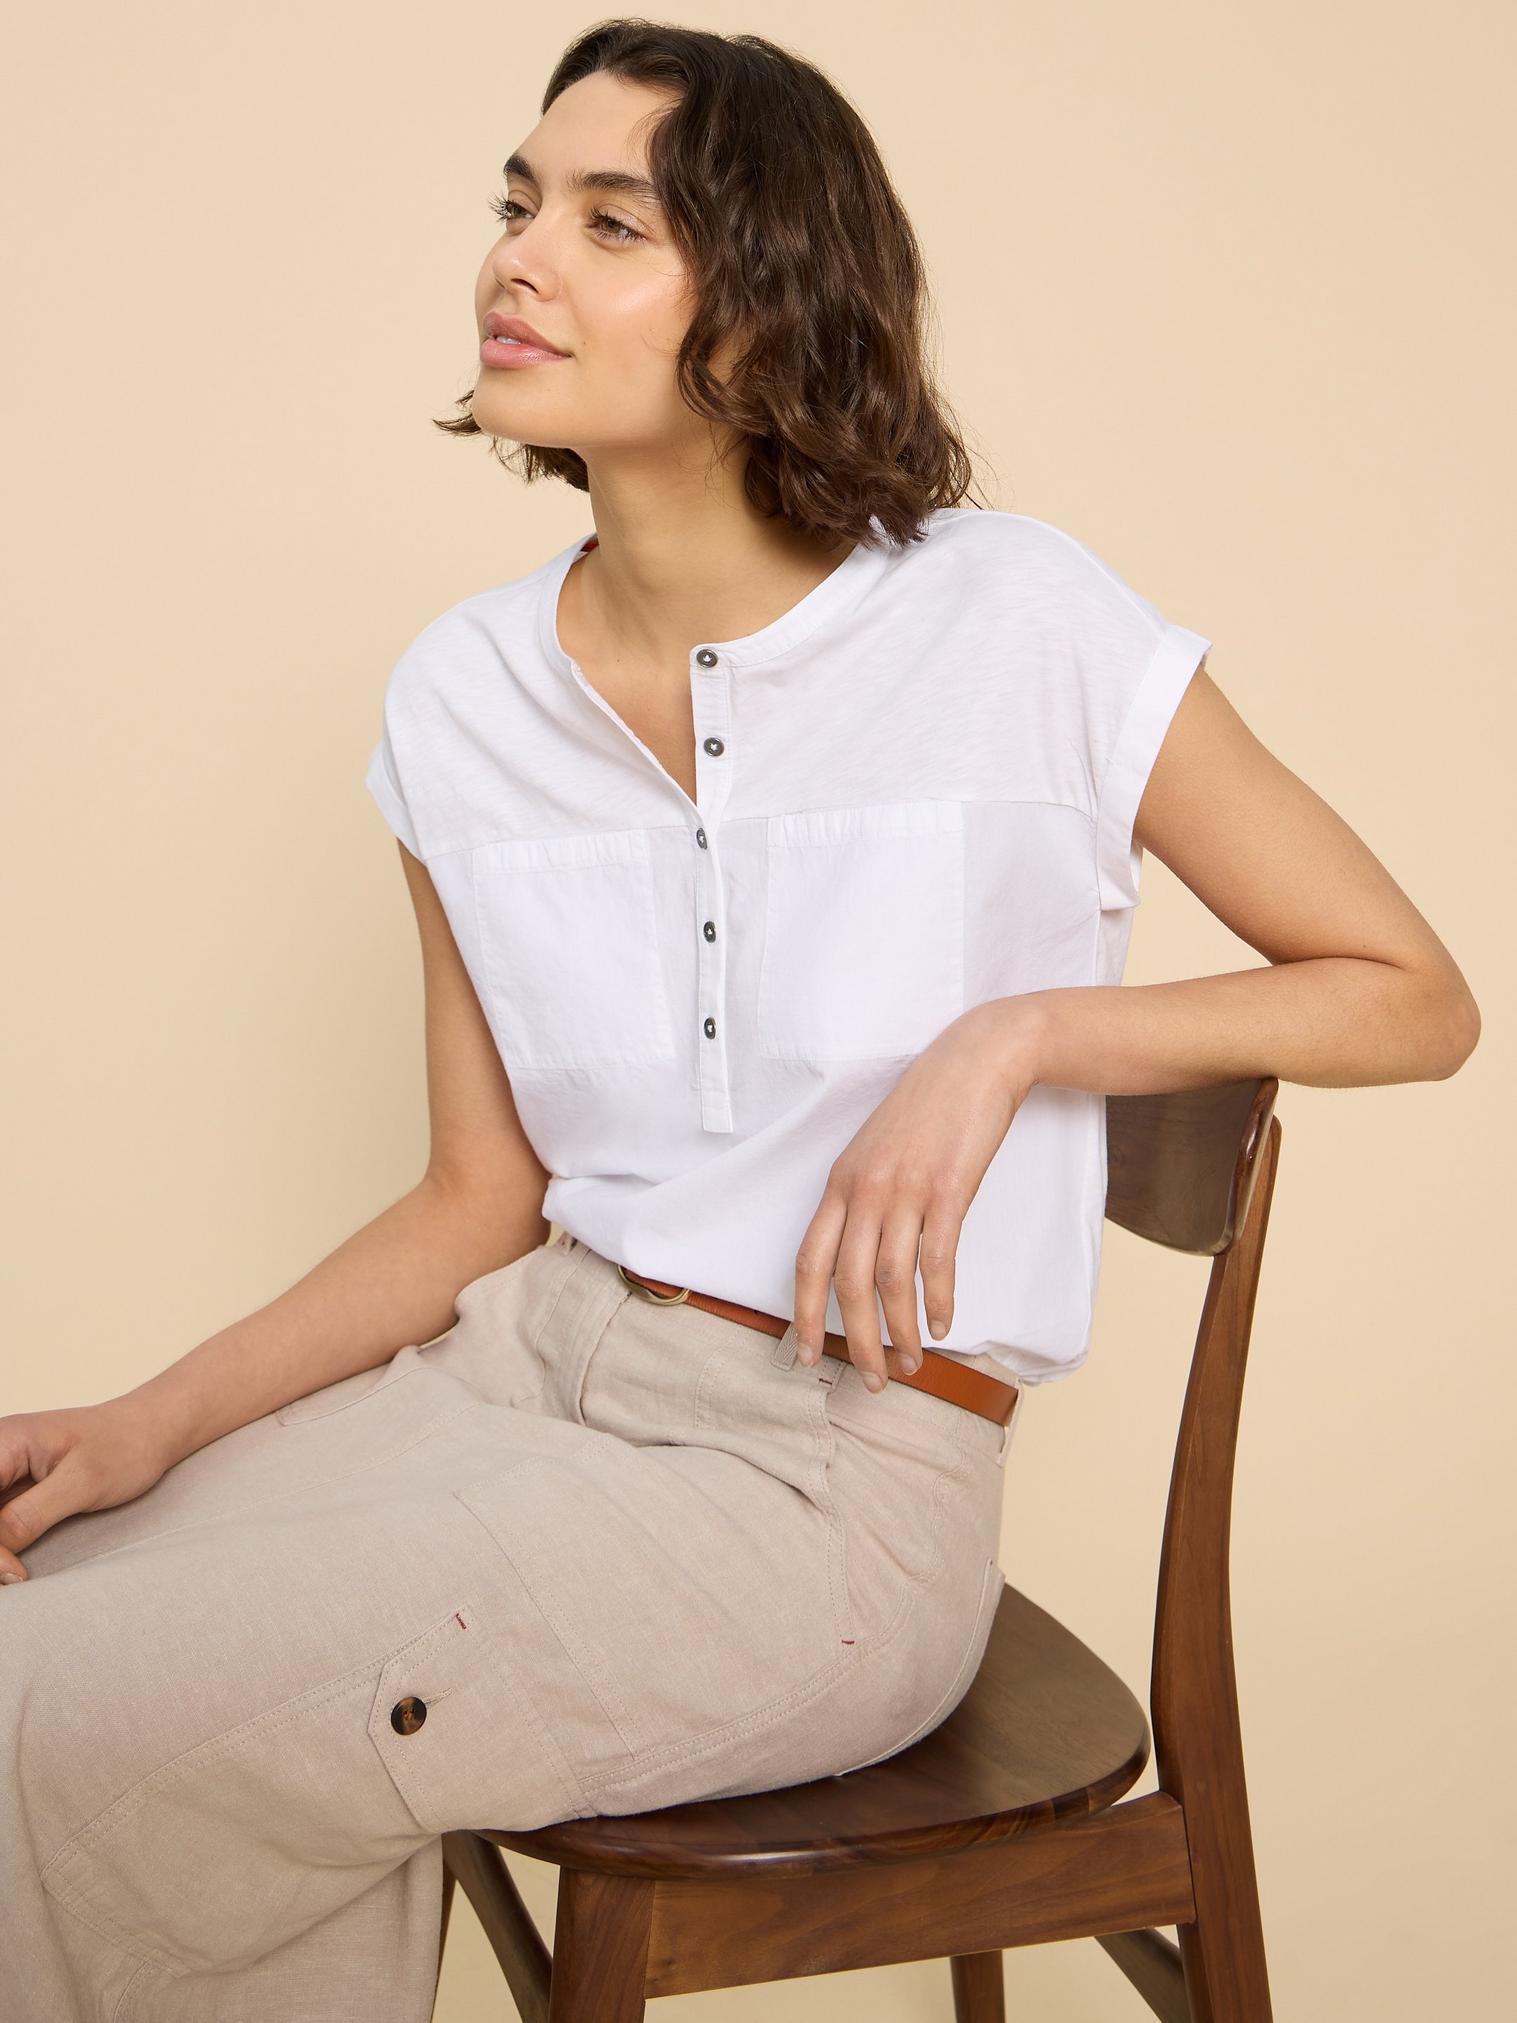 BETH JERSEY SHIRT in BRIL WHITE - LIFESTYLE